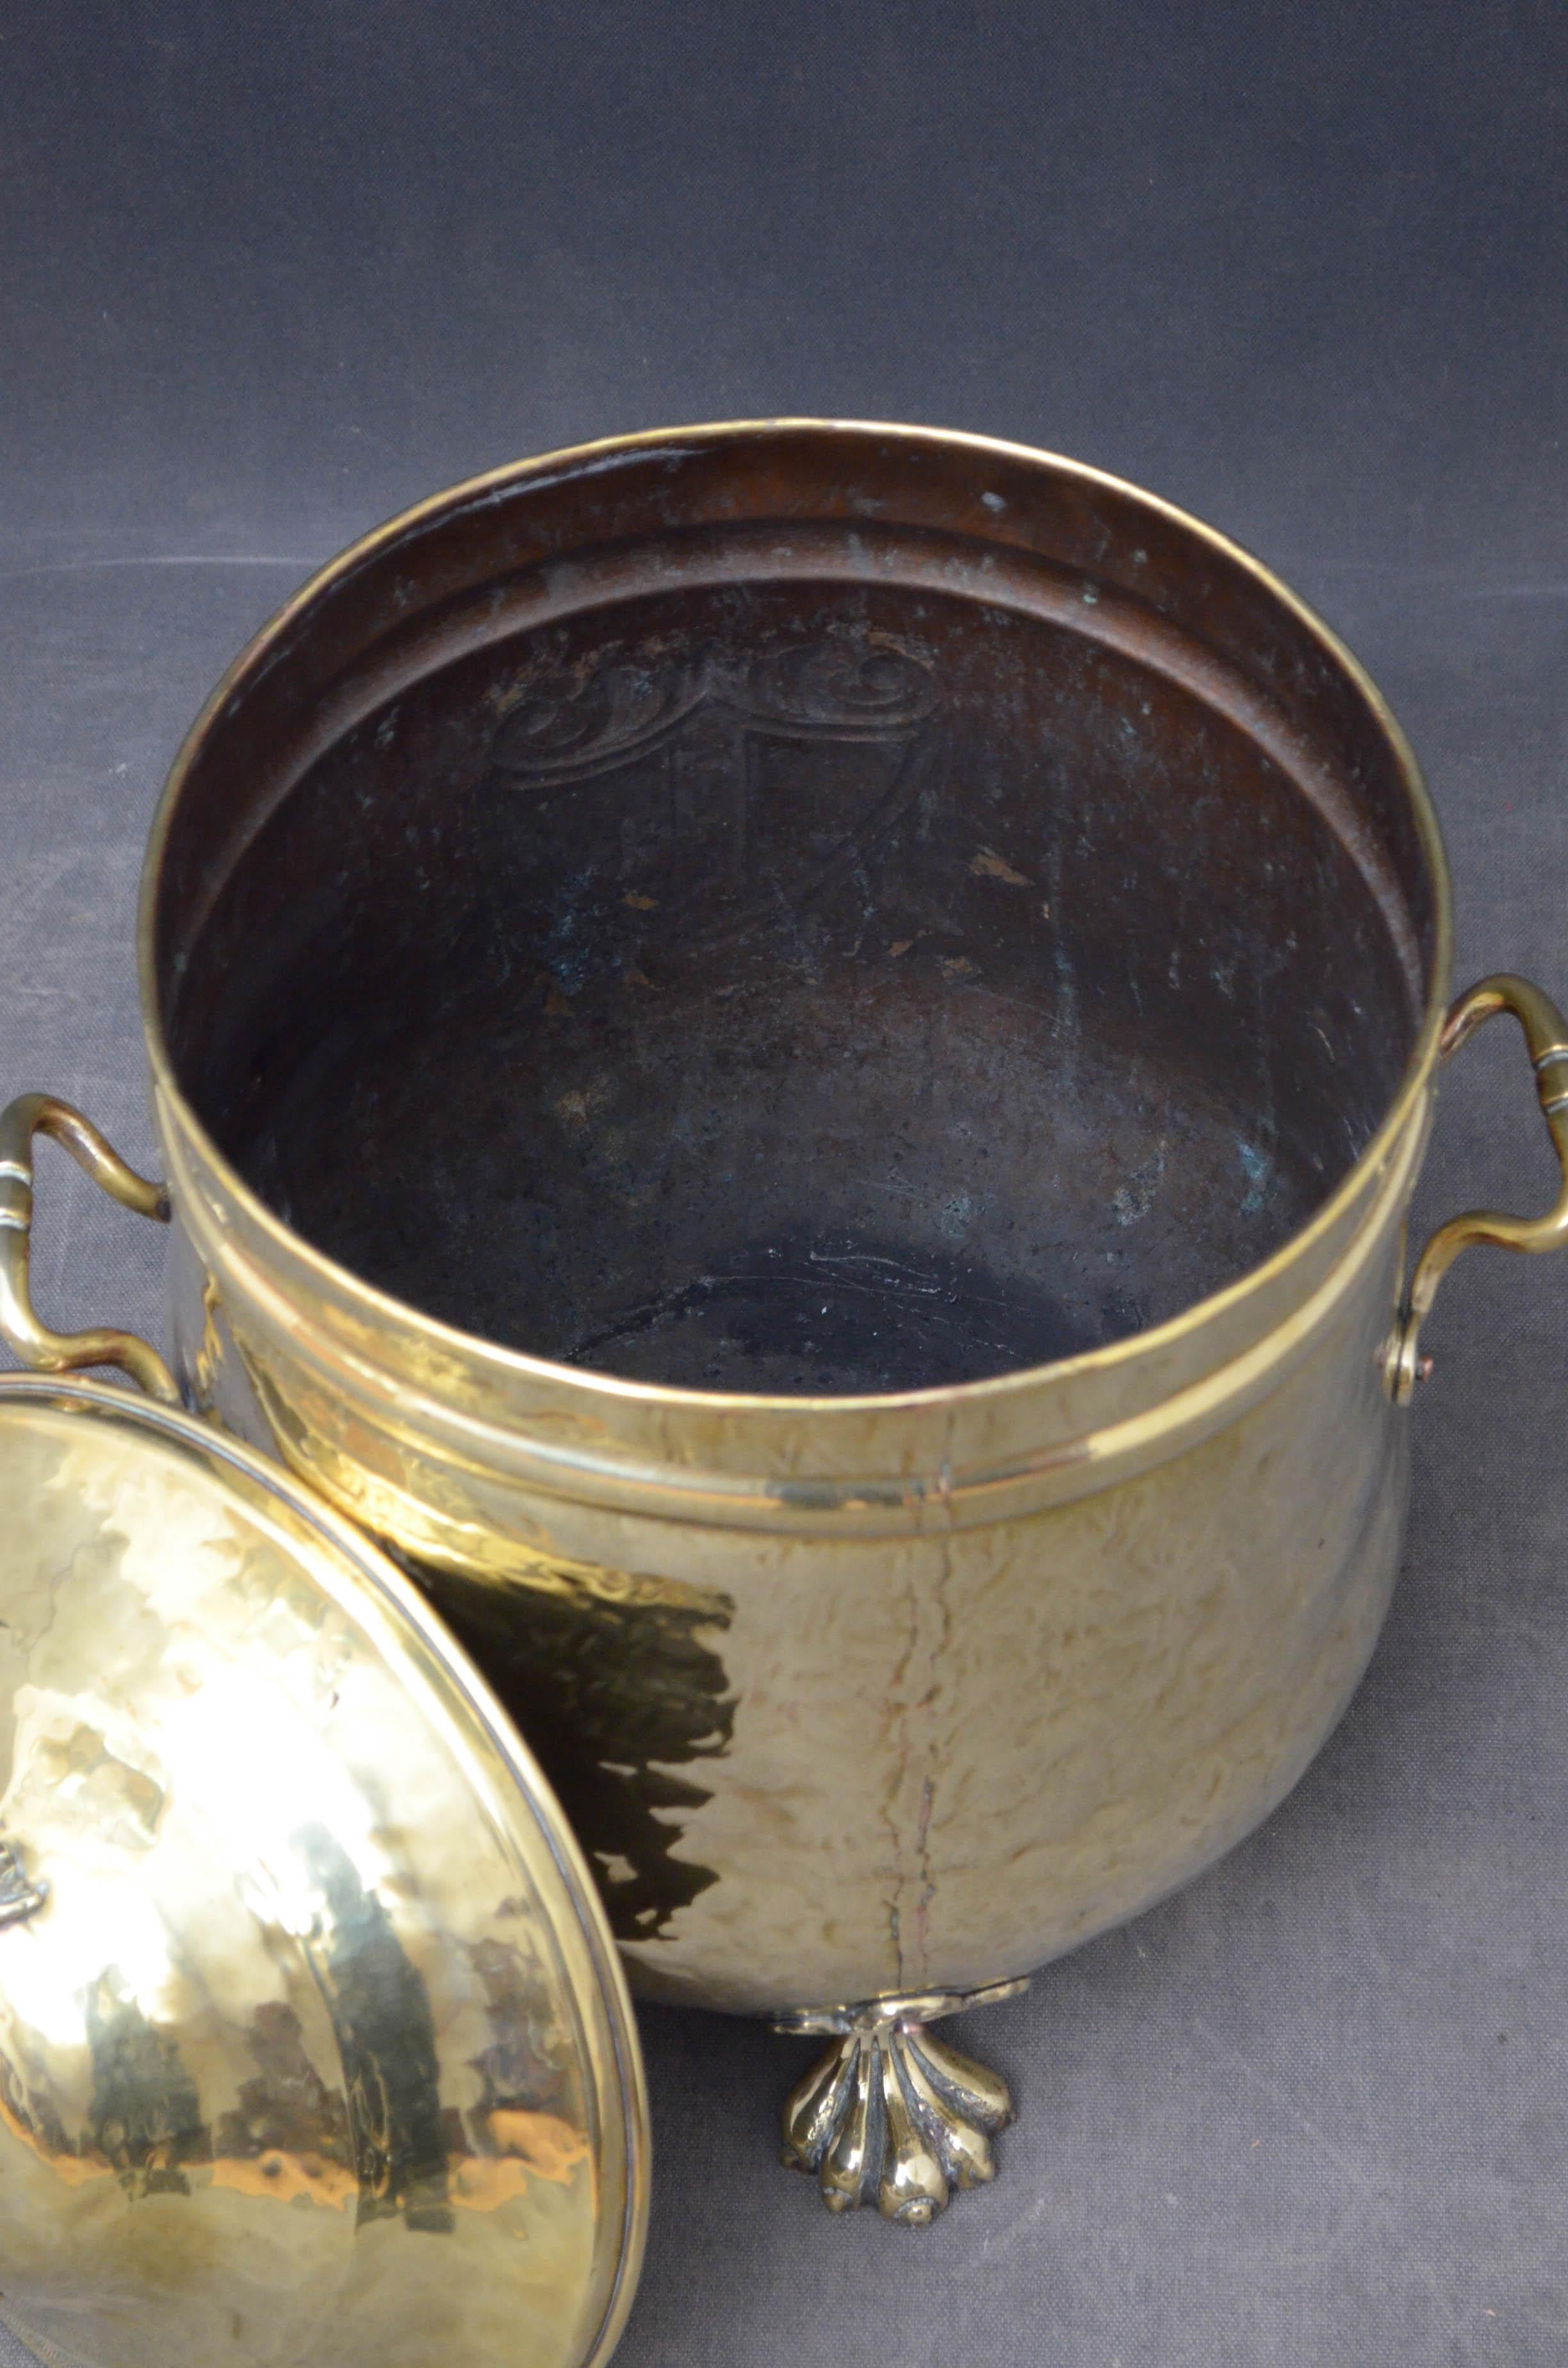 J00 Stylish late Victorian coal bucket in brass, having lift up lid and 2 carrying handles and heraldic symbol to the front, standing on 3 paw feet.

This antique coal bucket is in home ready condition, circa 1890

Measures: H 20